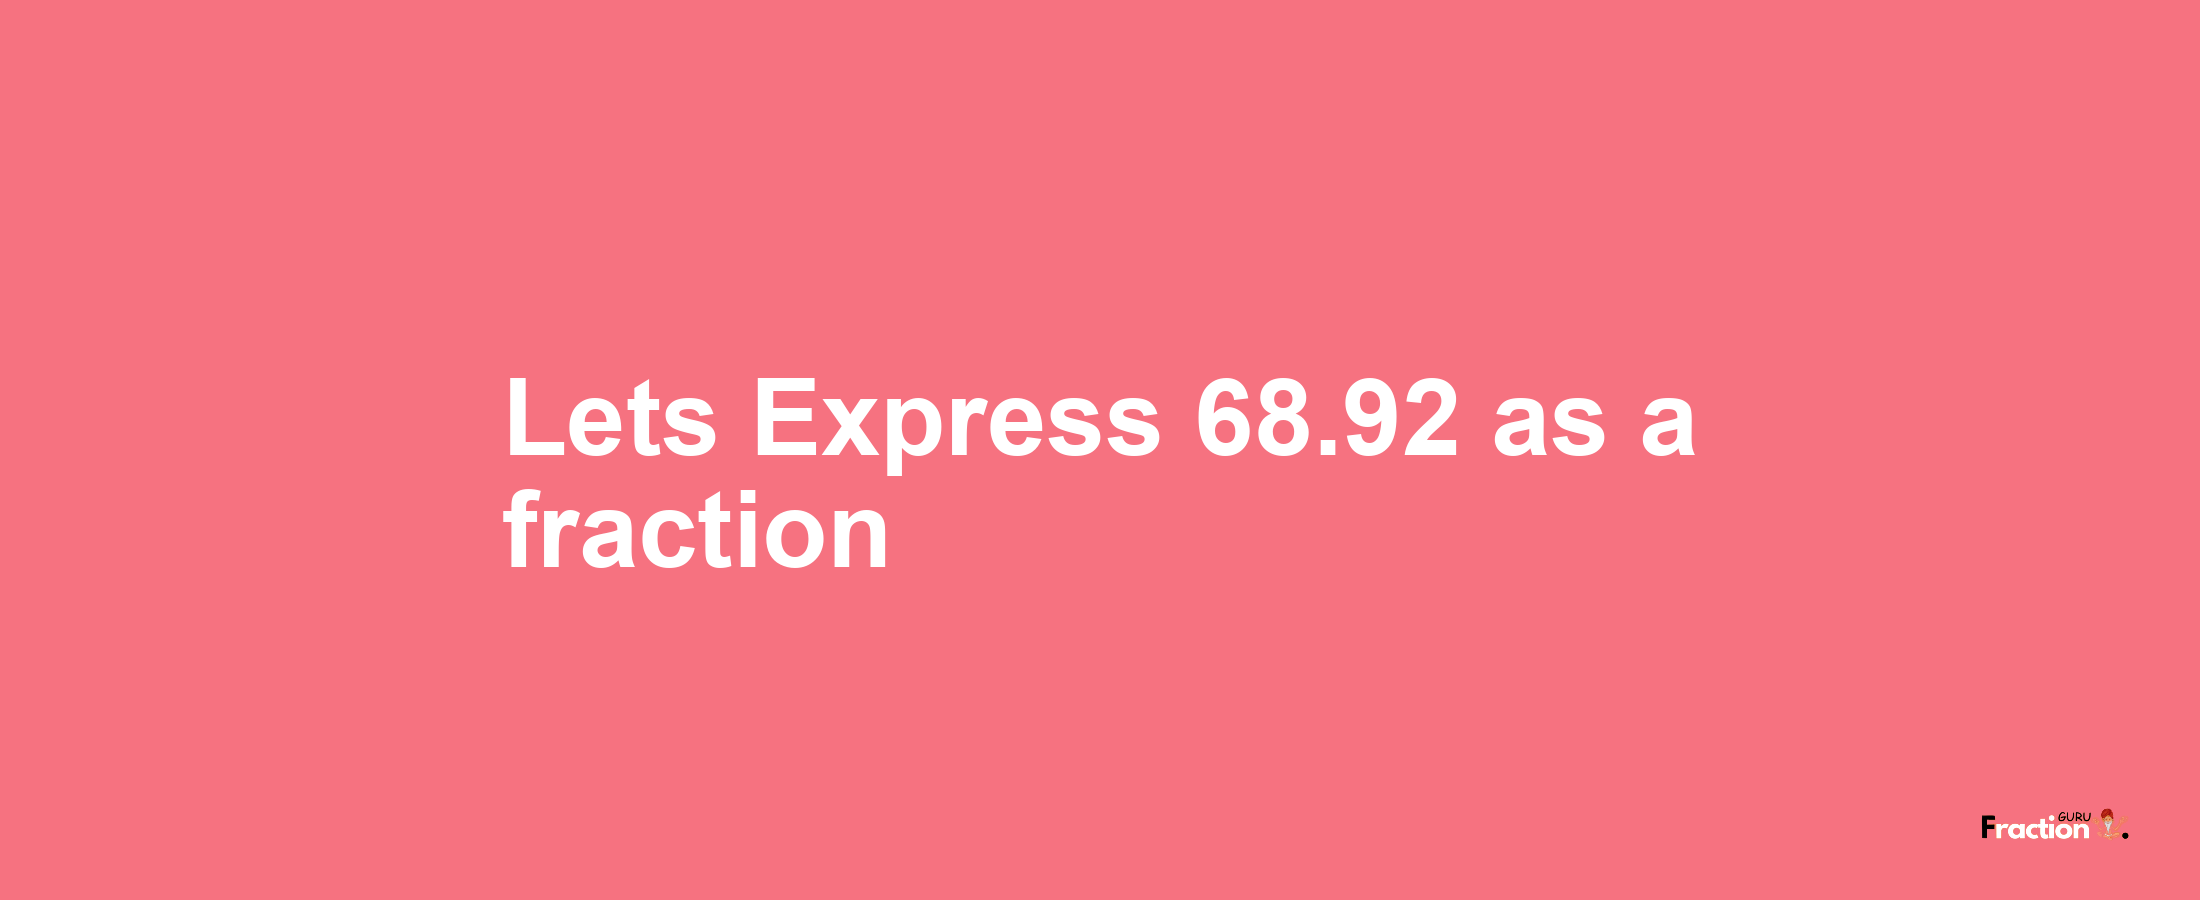 Lets Express 68.92 as afraction